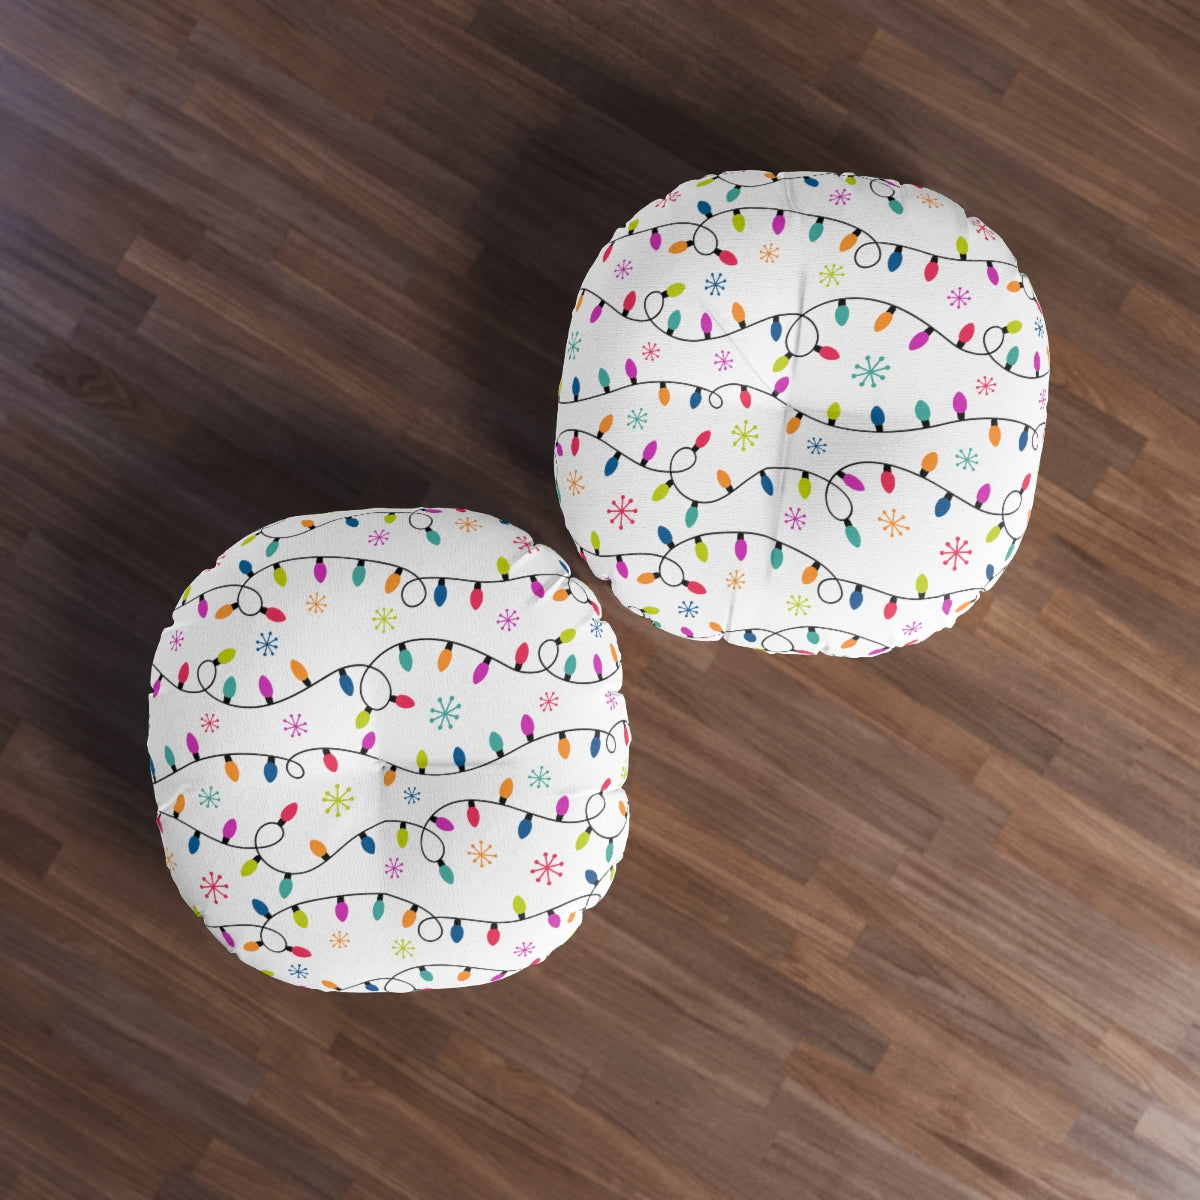 Christmas Lights Tufted Floor Pillow, Round